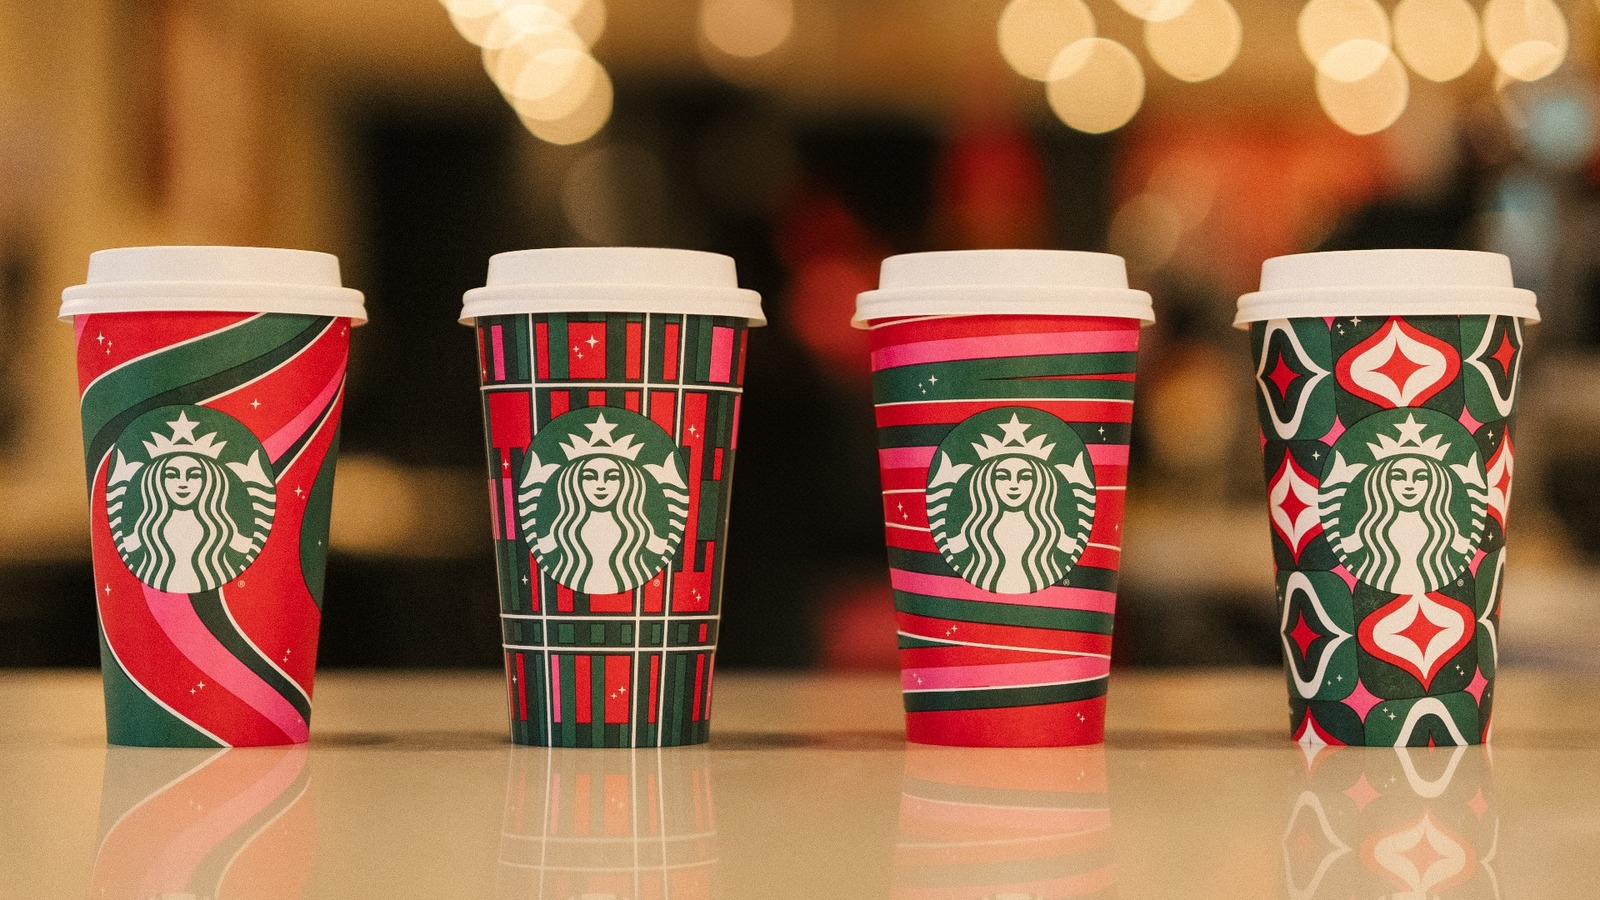 https://www.thedailymeal.com/img/gallery/starbucks-beloved-red-cups-are-back-with-4-festive-new-designs/l-intro-1698852516.jpg